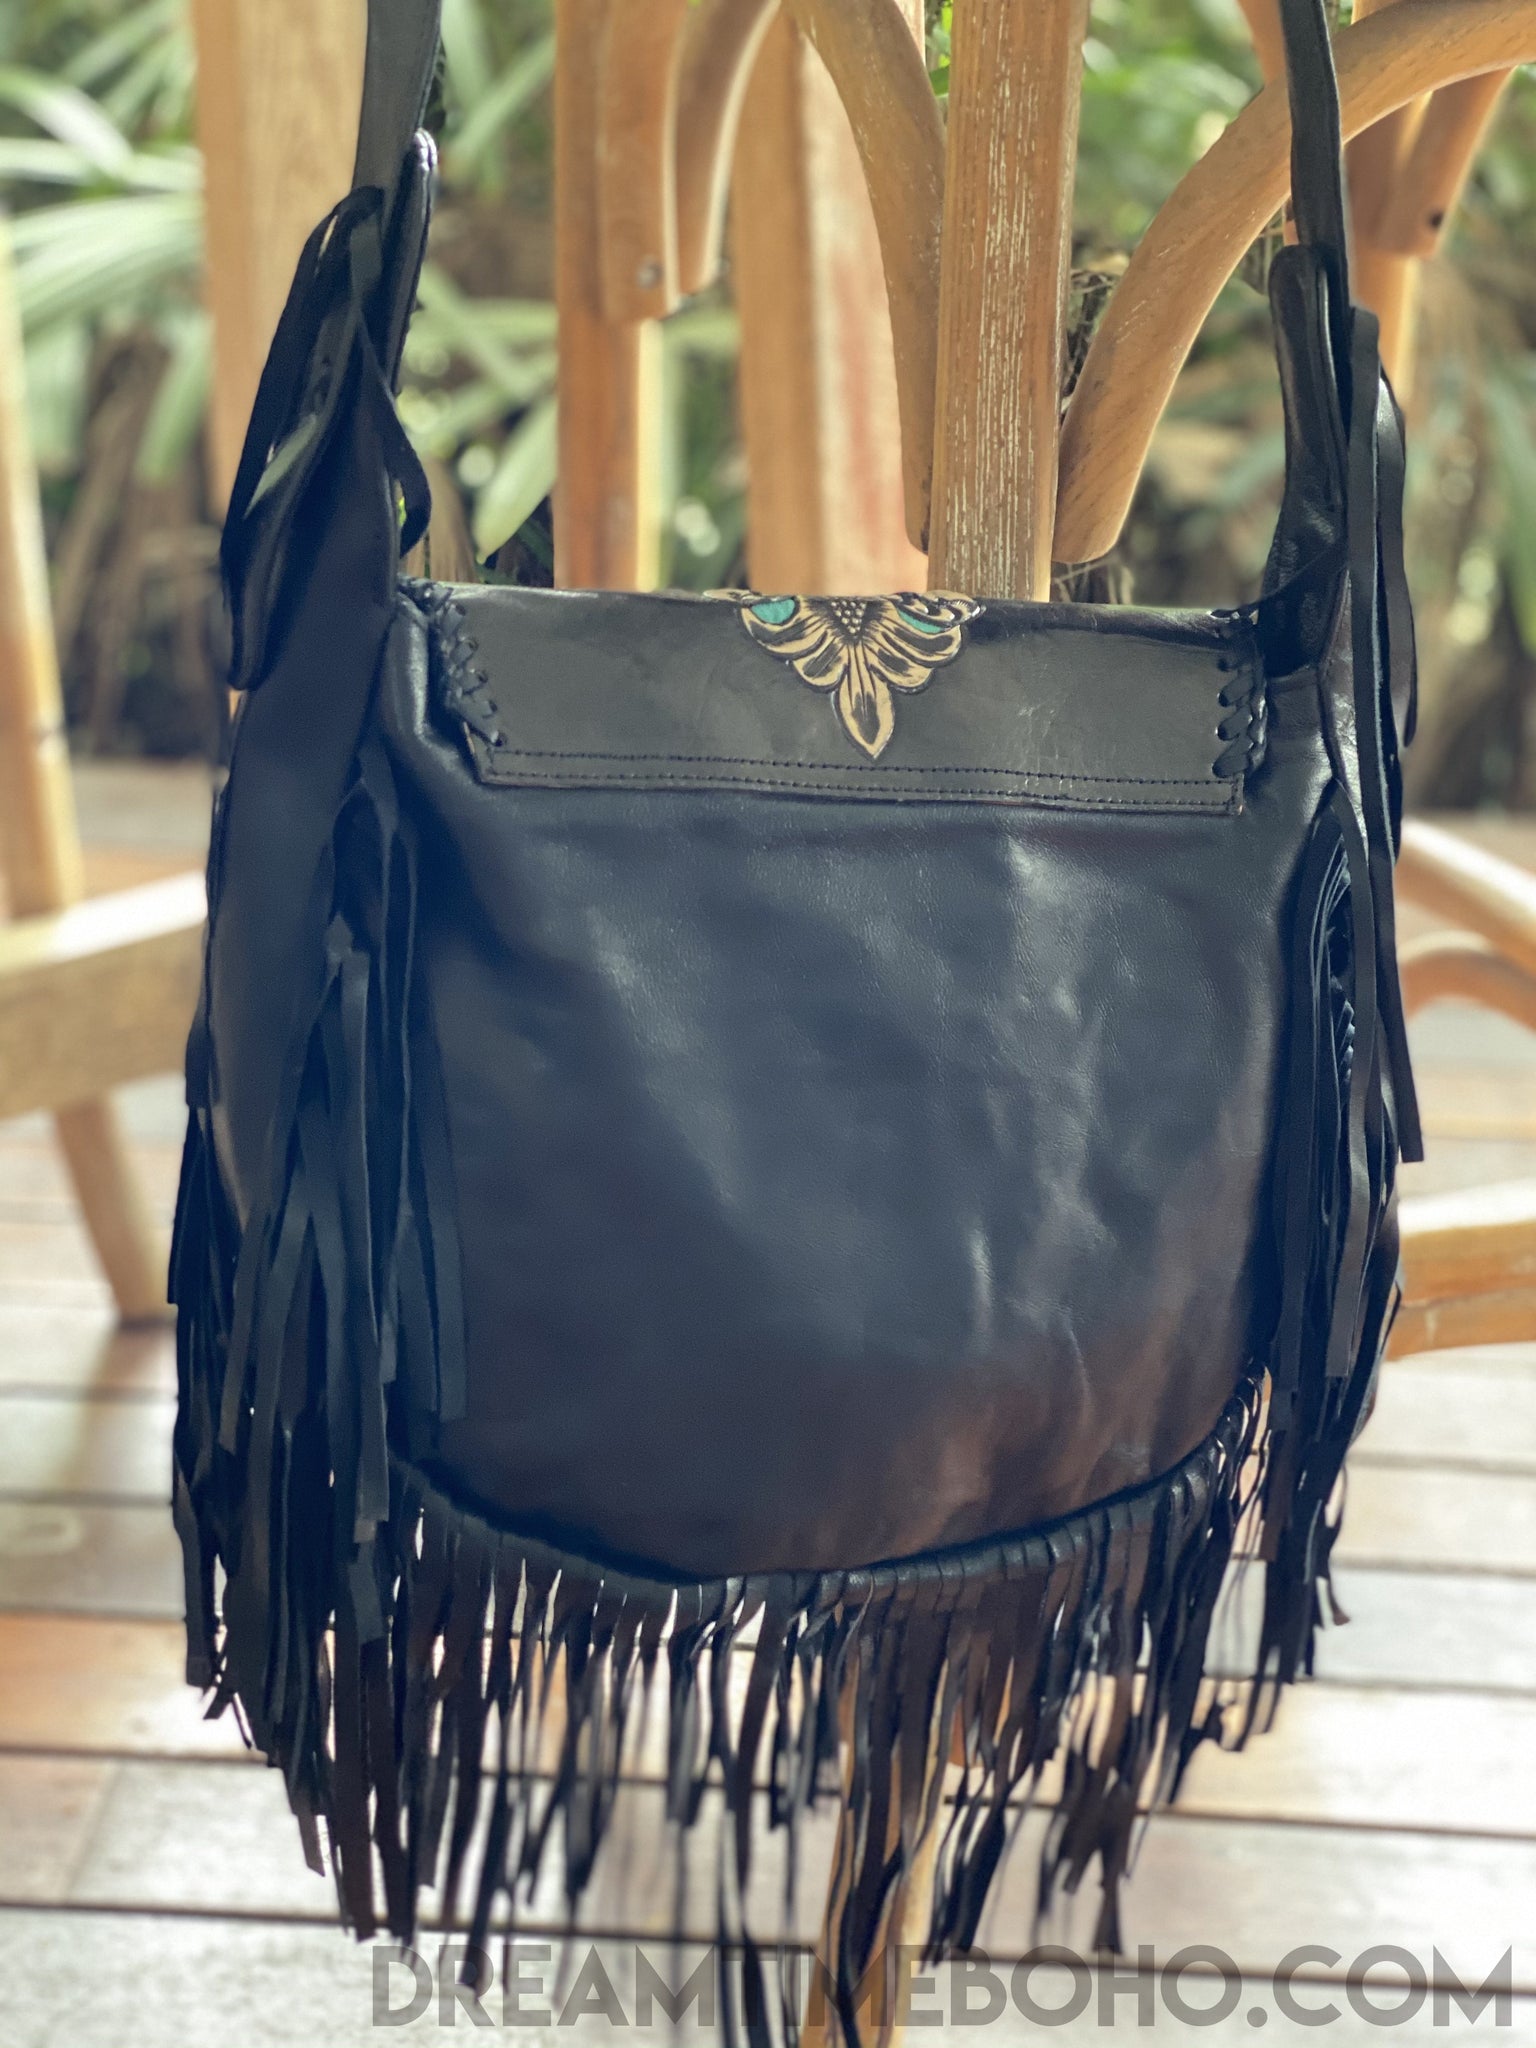 Boho Fringe Bag, Gypsy Vegan Suede Leather Purse, Cross Body Bohemian Bag,  Floral Purse, Unique Gift for Her - Etsy